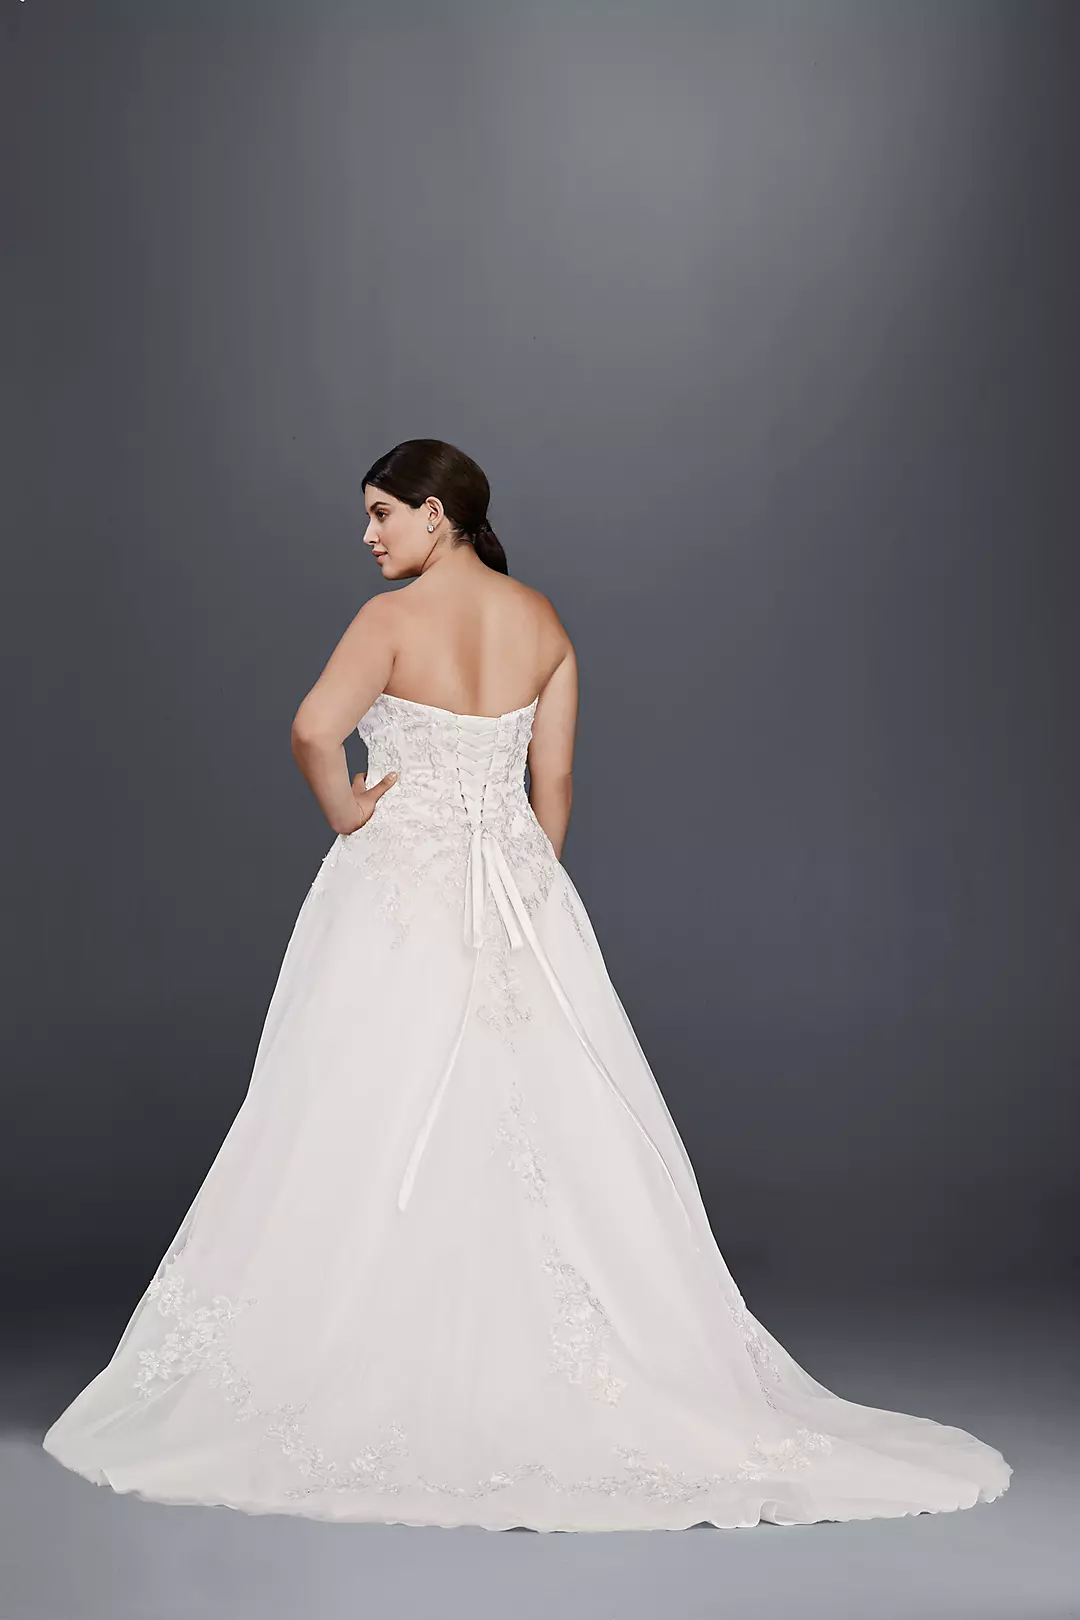 Tulle Plus Size Wedding Dress with Lace Appliques Image 2